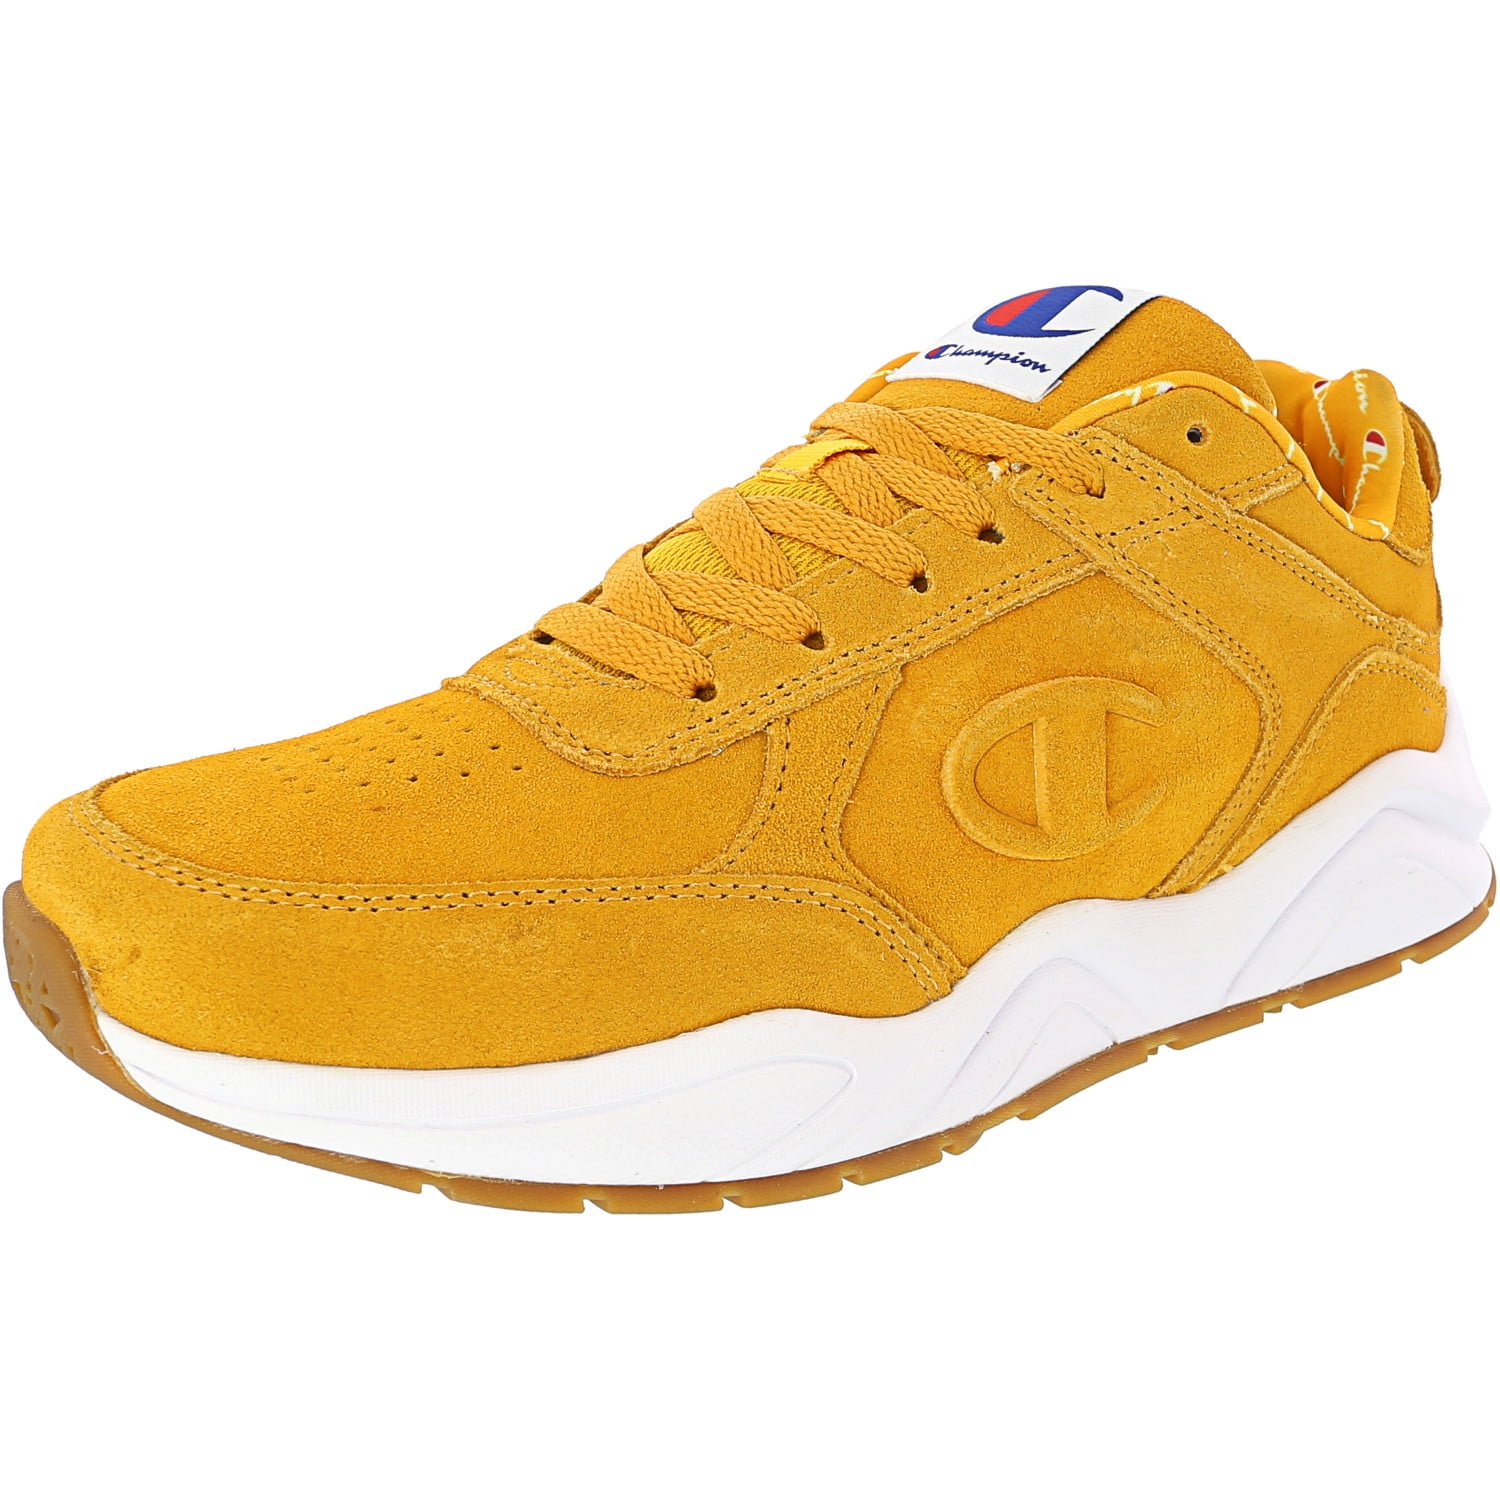 gold champion shoes